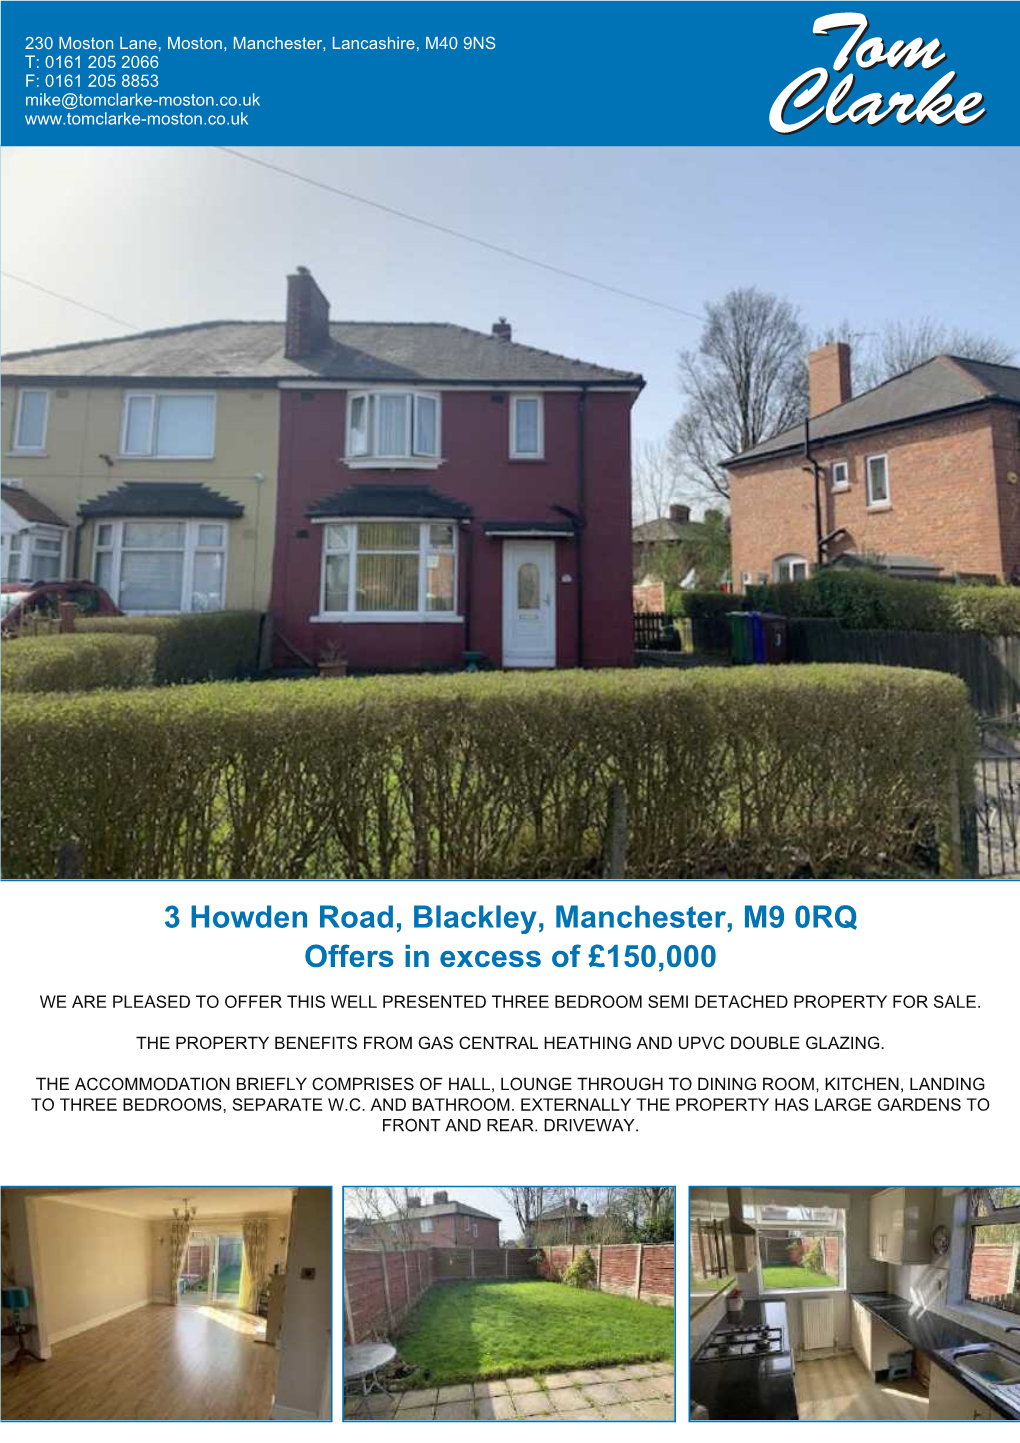 3 Howden Road, Blackley, Manchester, M9 0RQ Offers in Excess of £150,000